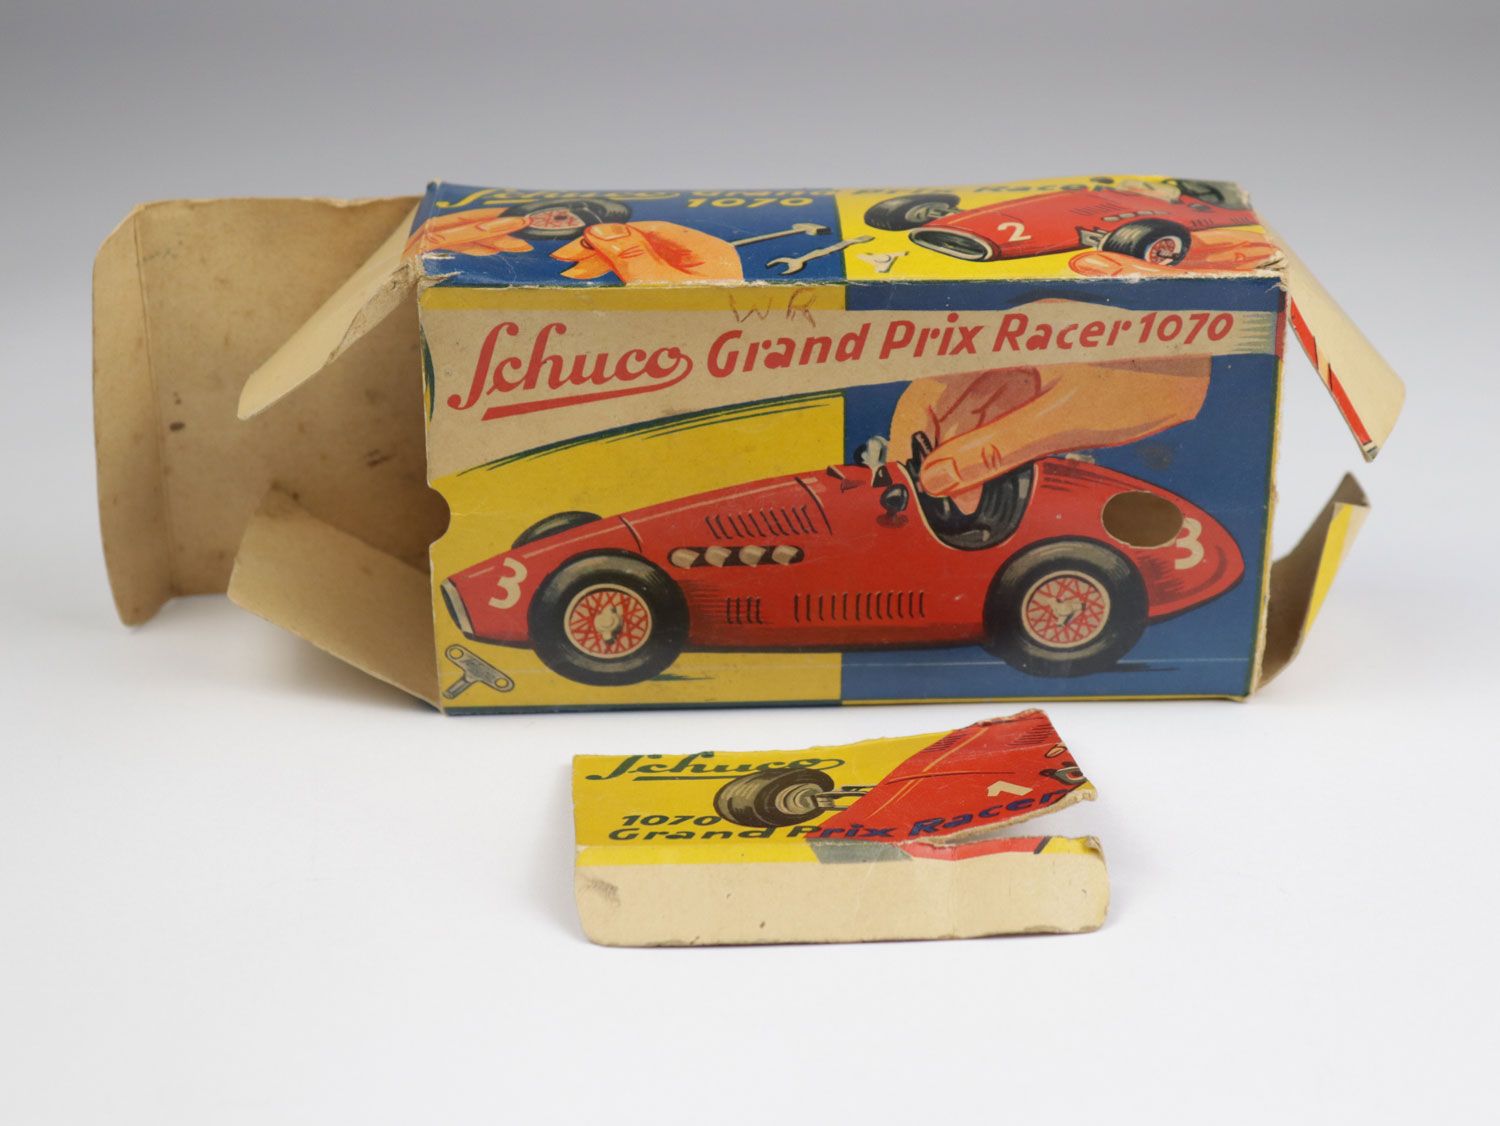 Null Schuco Grand-Prix- Racer 1070 - racing car, red varnished, with OK, not wor&hellip;